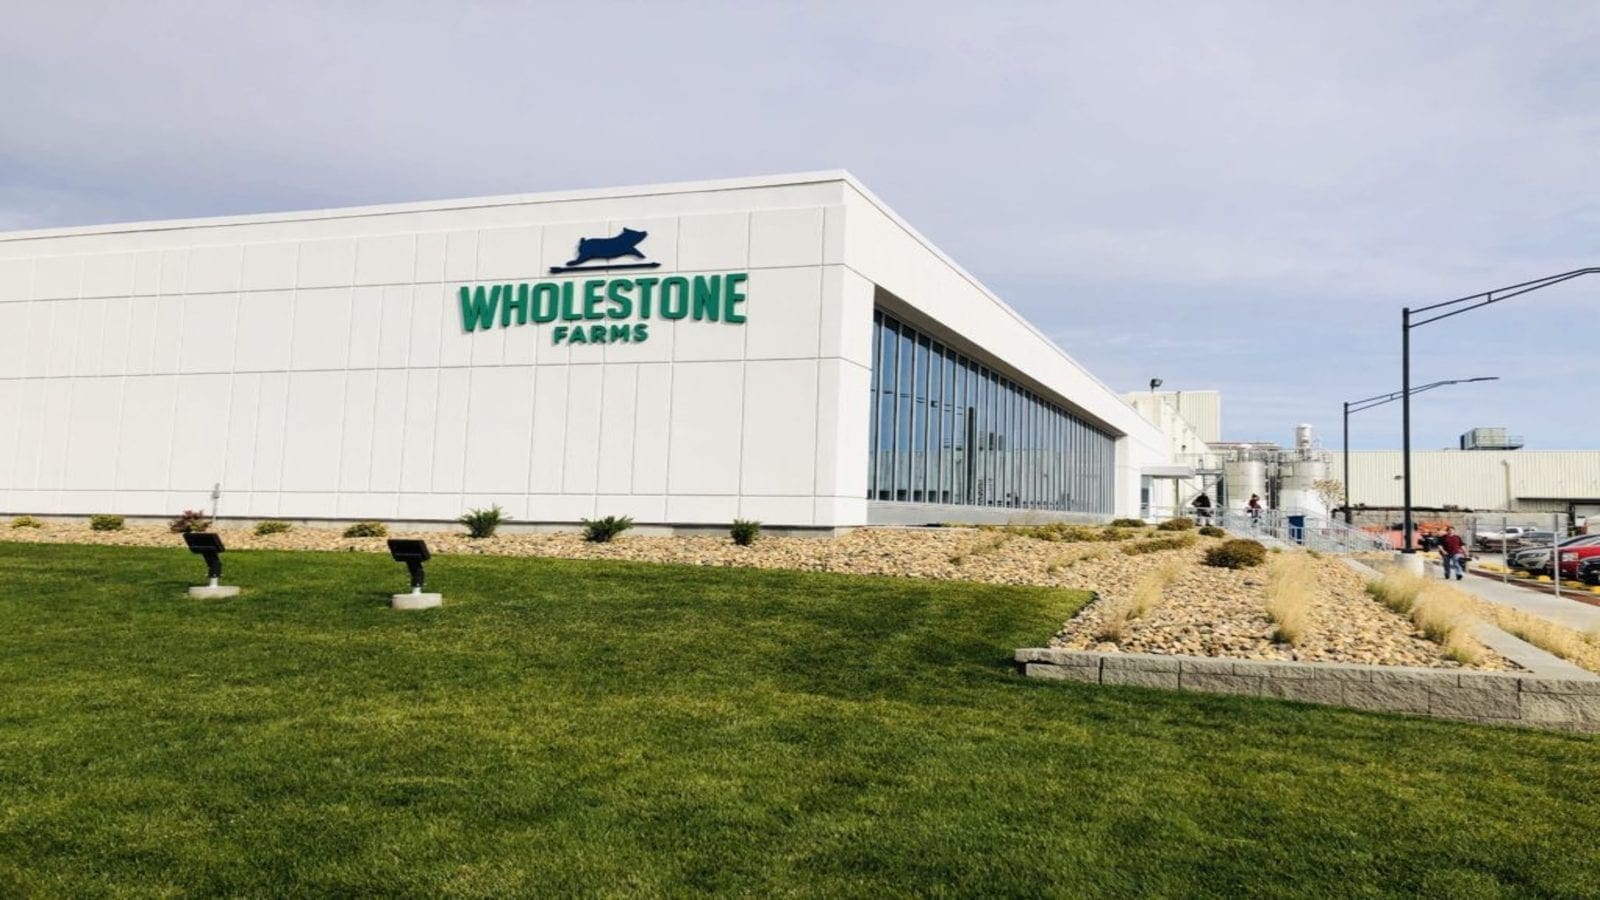 Wholestone Farms to establish US$500m pork facility in South Dakota as Hill’s Pet Nutrition invests in a new plant in Kansas